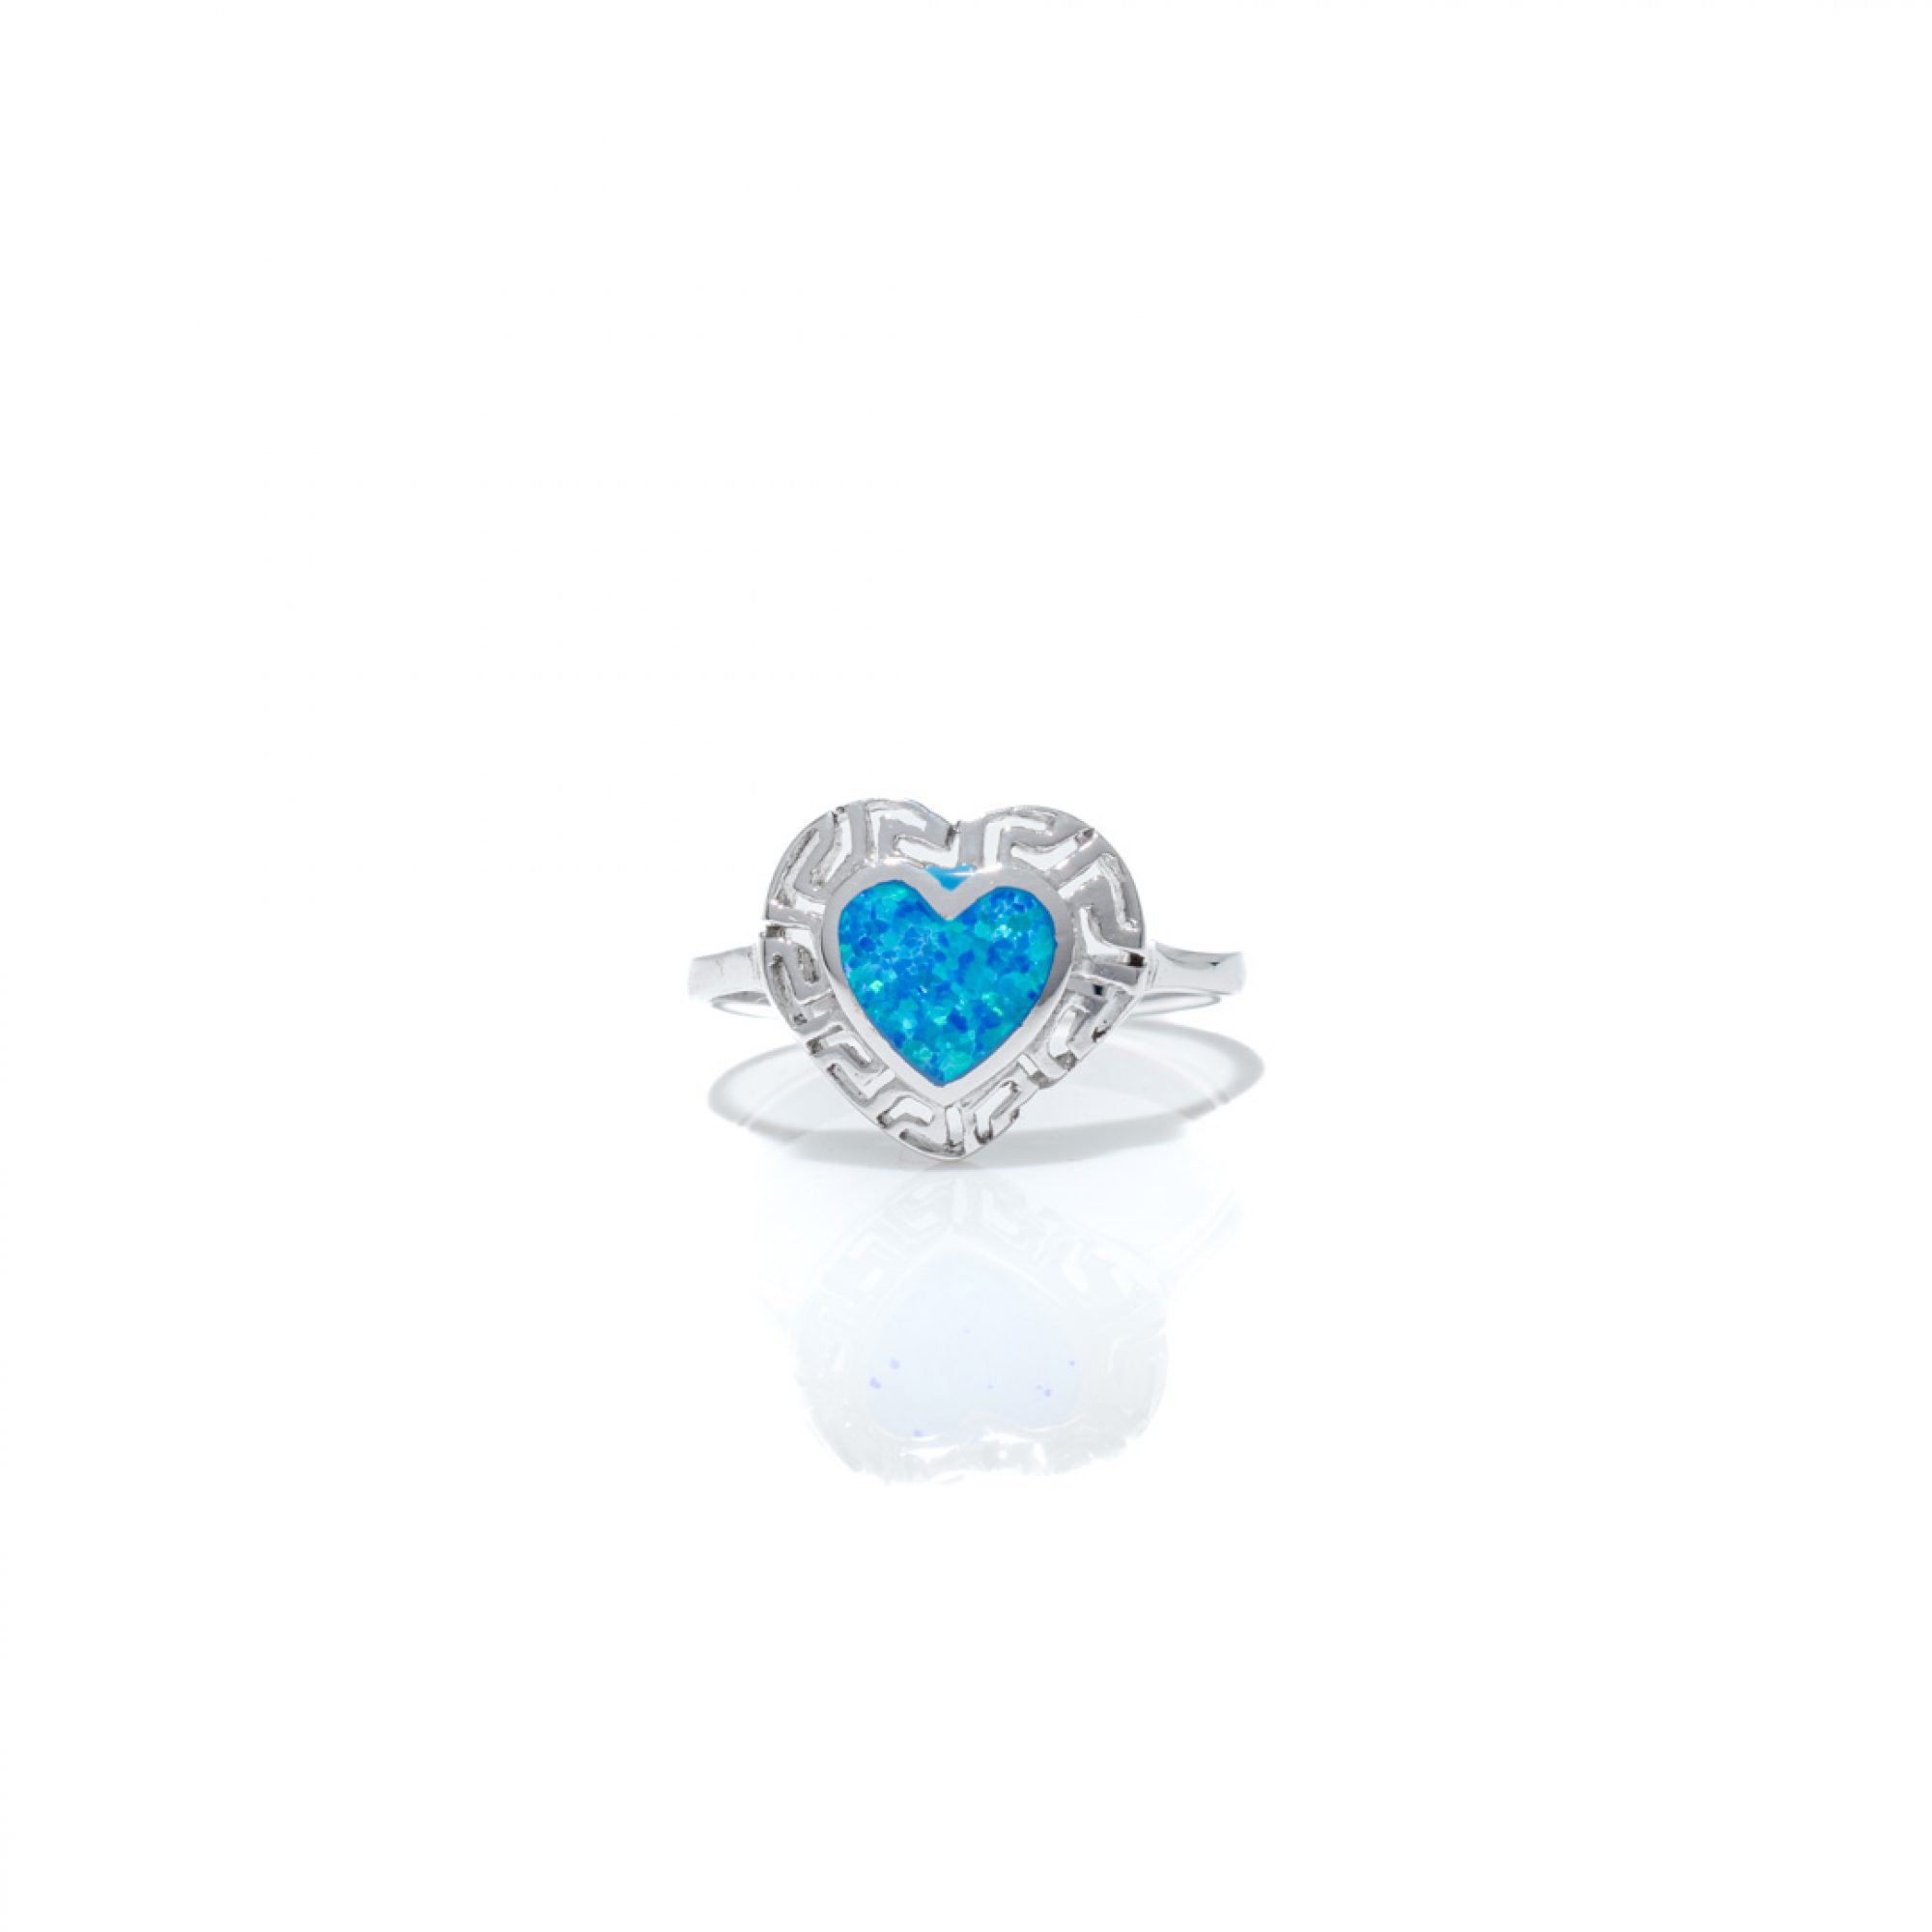 Silver heart ring with opal stone and meander